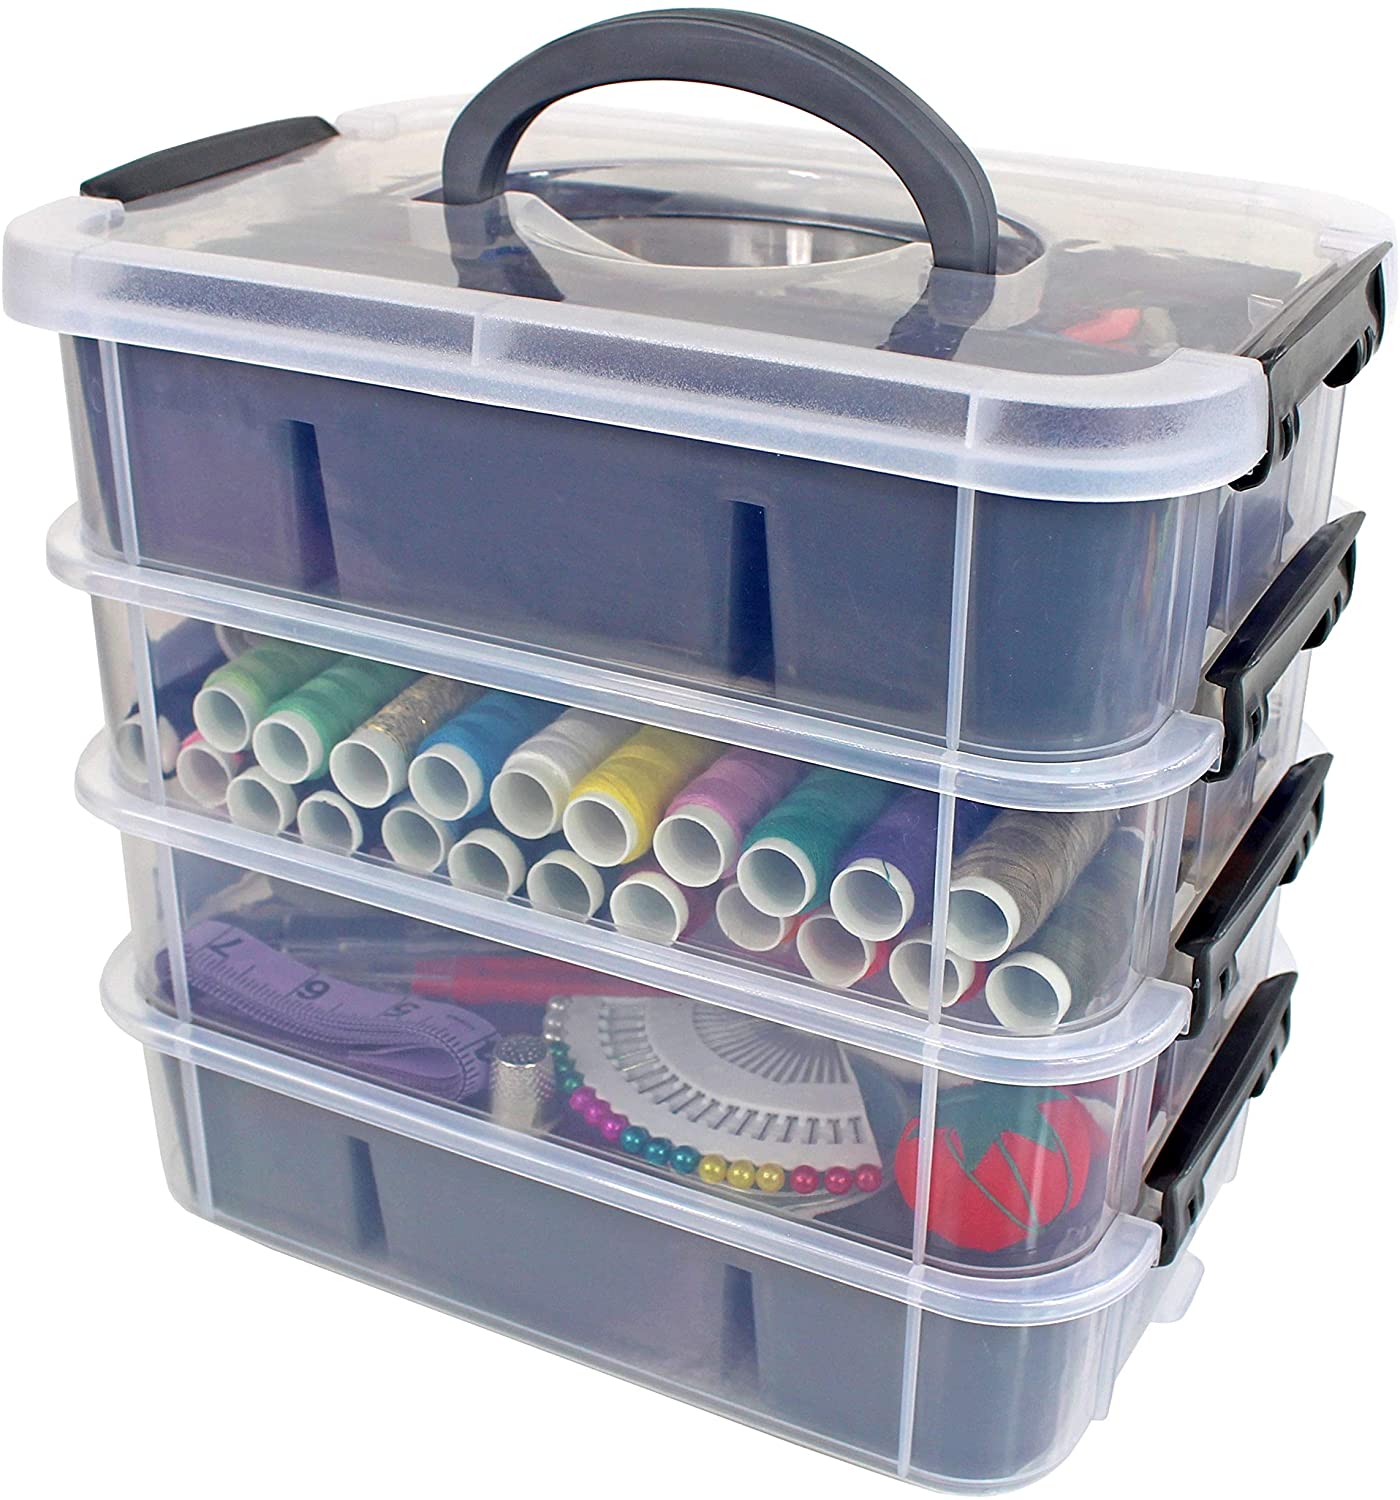 Stackable Art Supply Organizer with Trays - Gray